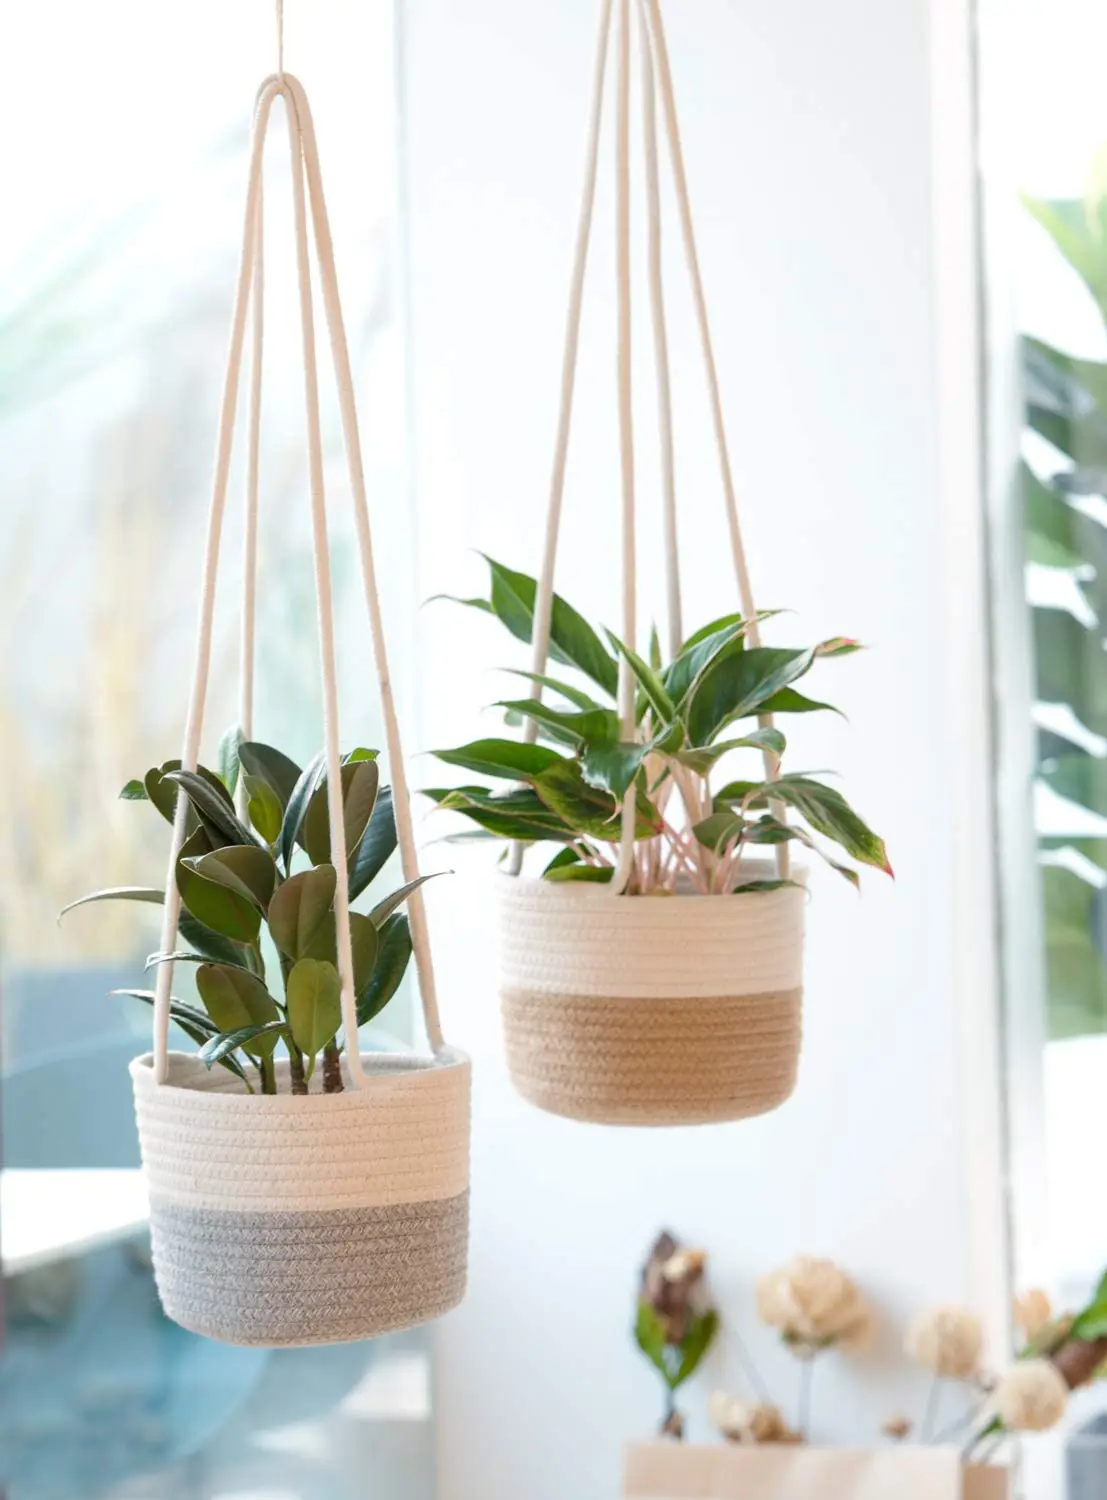 Modern Home Indoor Decor Up To 7 Pot Macrame Plant Hangers Cotton Rope Hanging Planter Woven Plant Basket Suspended Buy Wall Hanging Plant Basket Rope Plant Basket Suspended Woven Decorative Wall Hanging Baskets